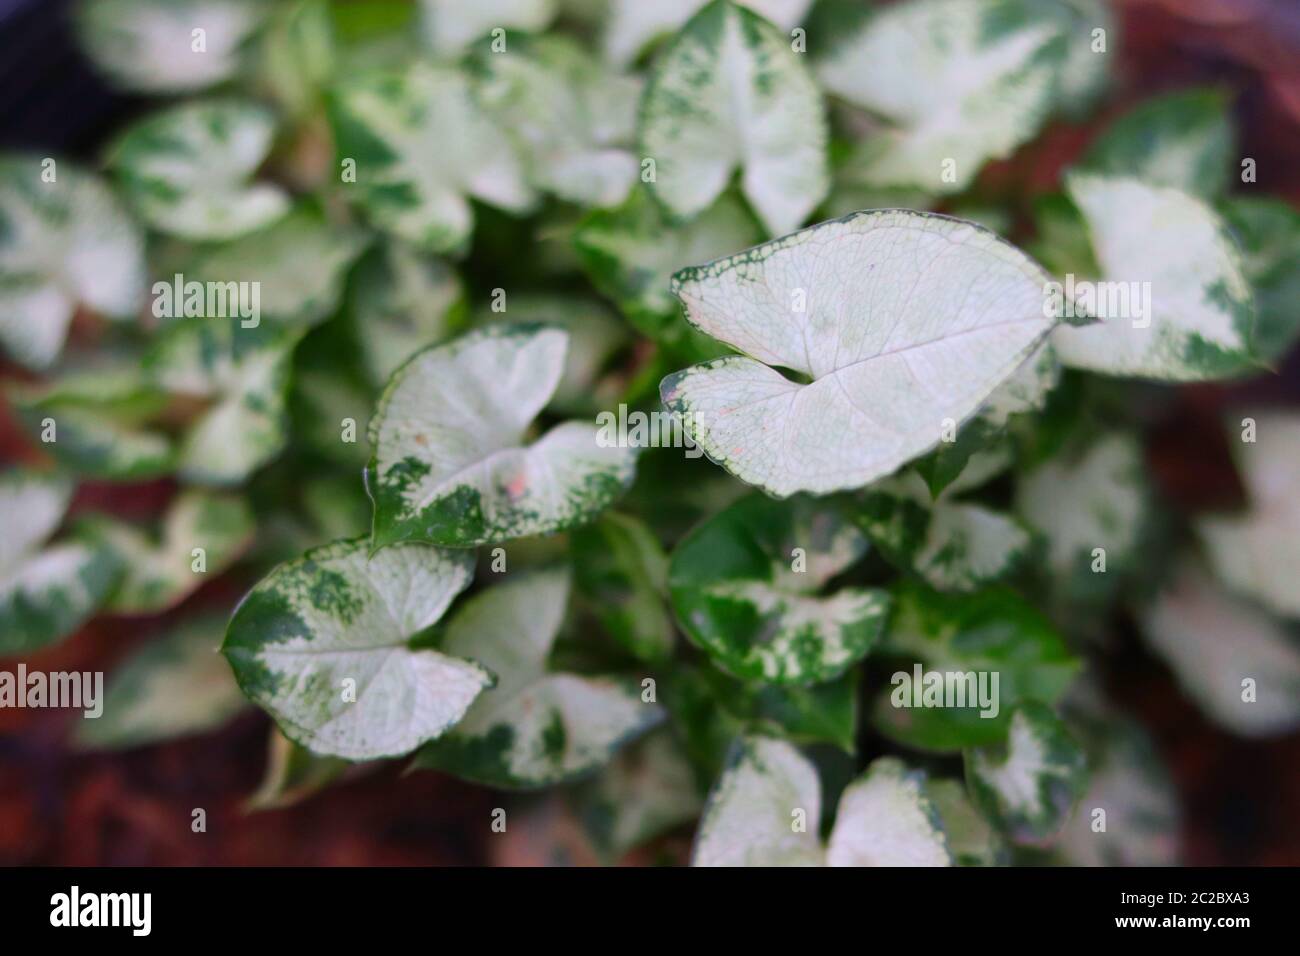 Caladium bicolor (Aiton) Vent flower plant with blurred background - botanical, ecological and environmental concept Stock Photo